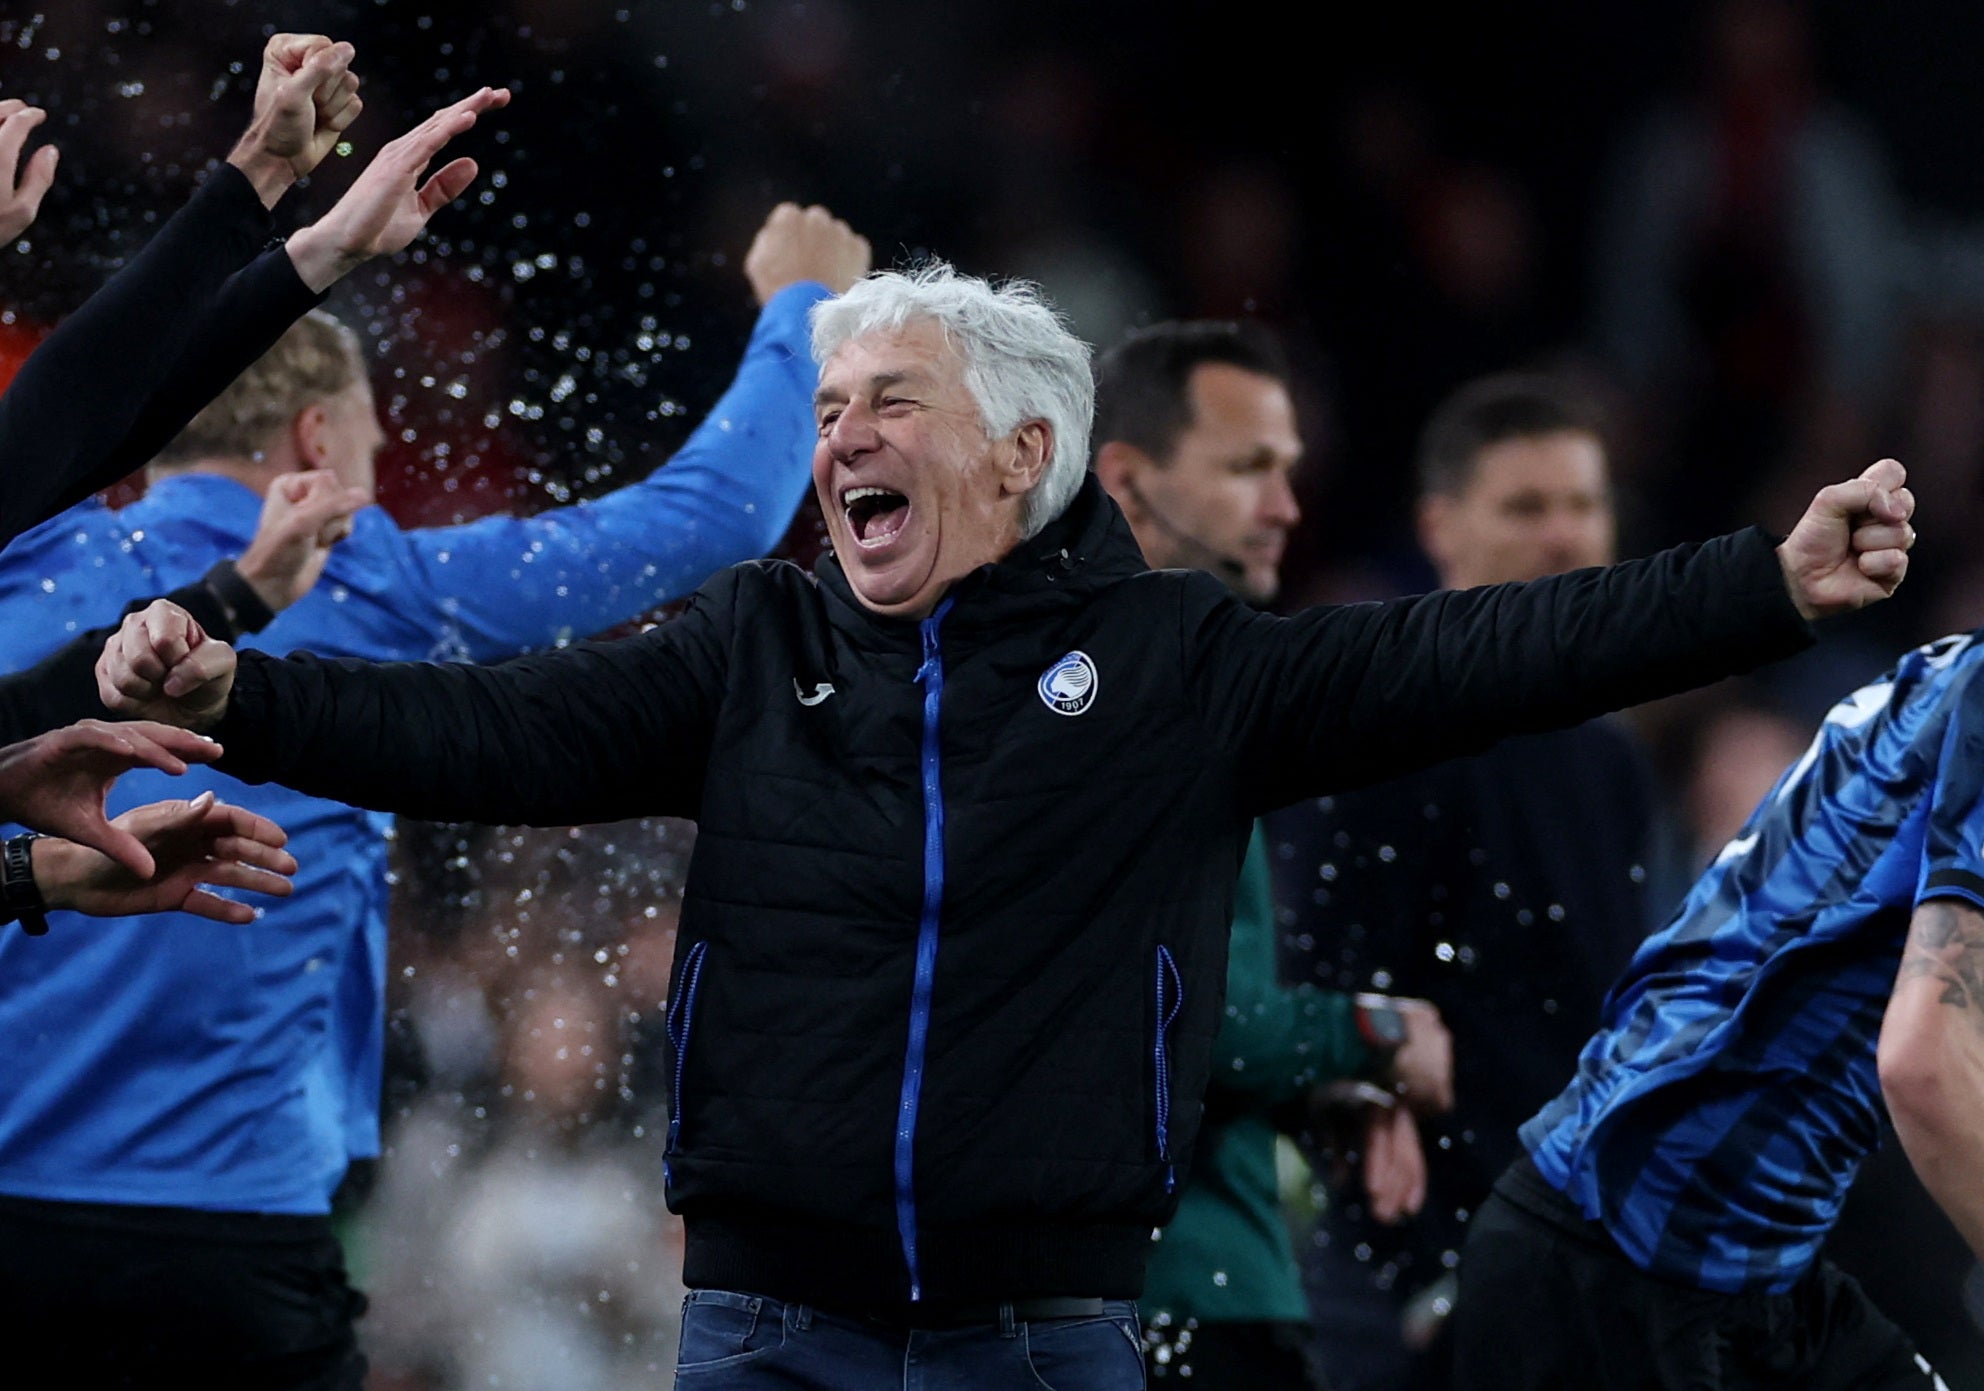 Gian Piero Gasperini celebrated winning his first ever trophy as a manager